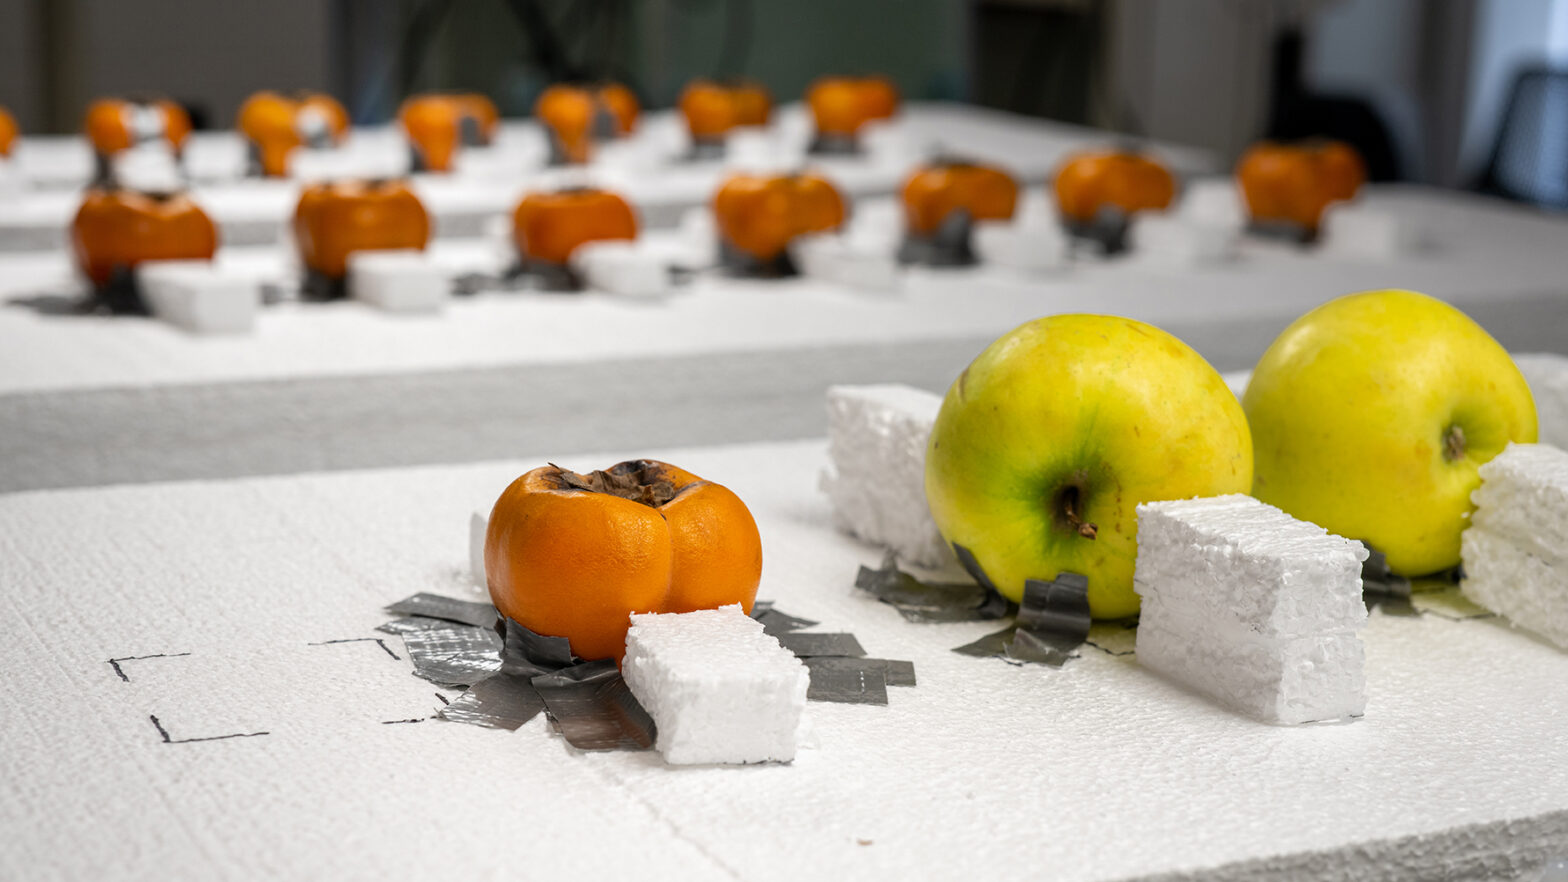 Persimmons and apples duct-taped to a Styrofoam platform in an ordered array.